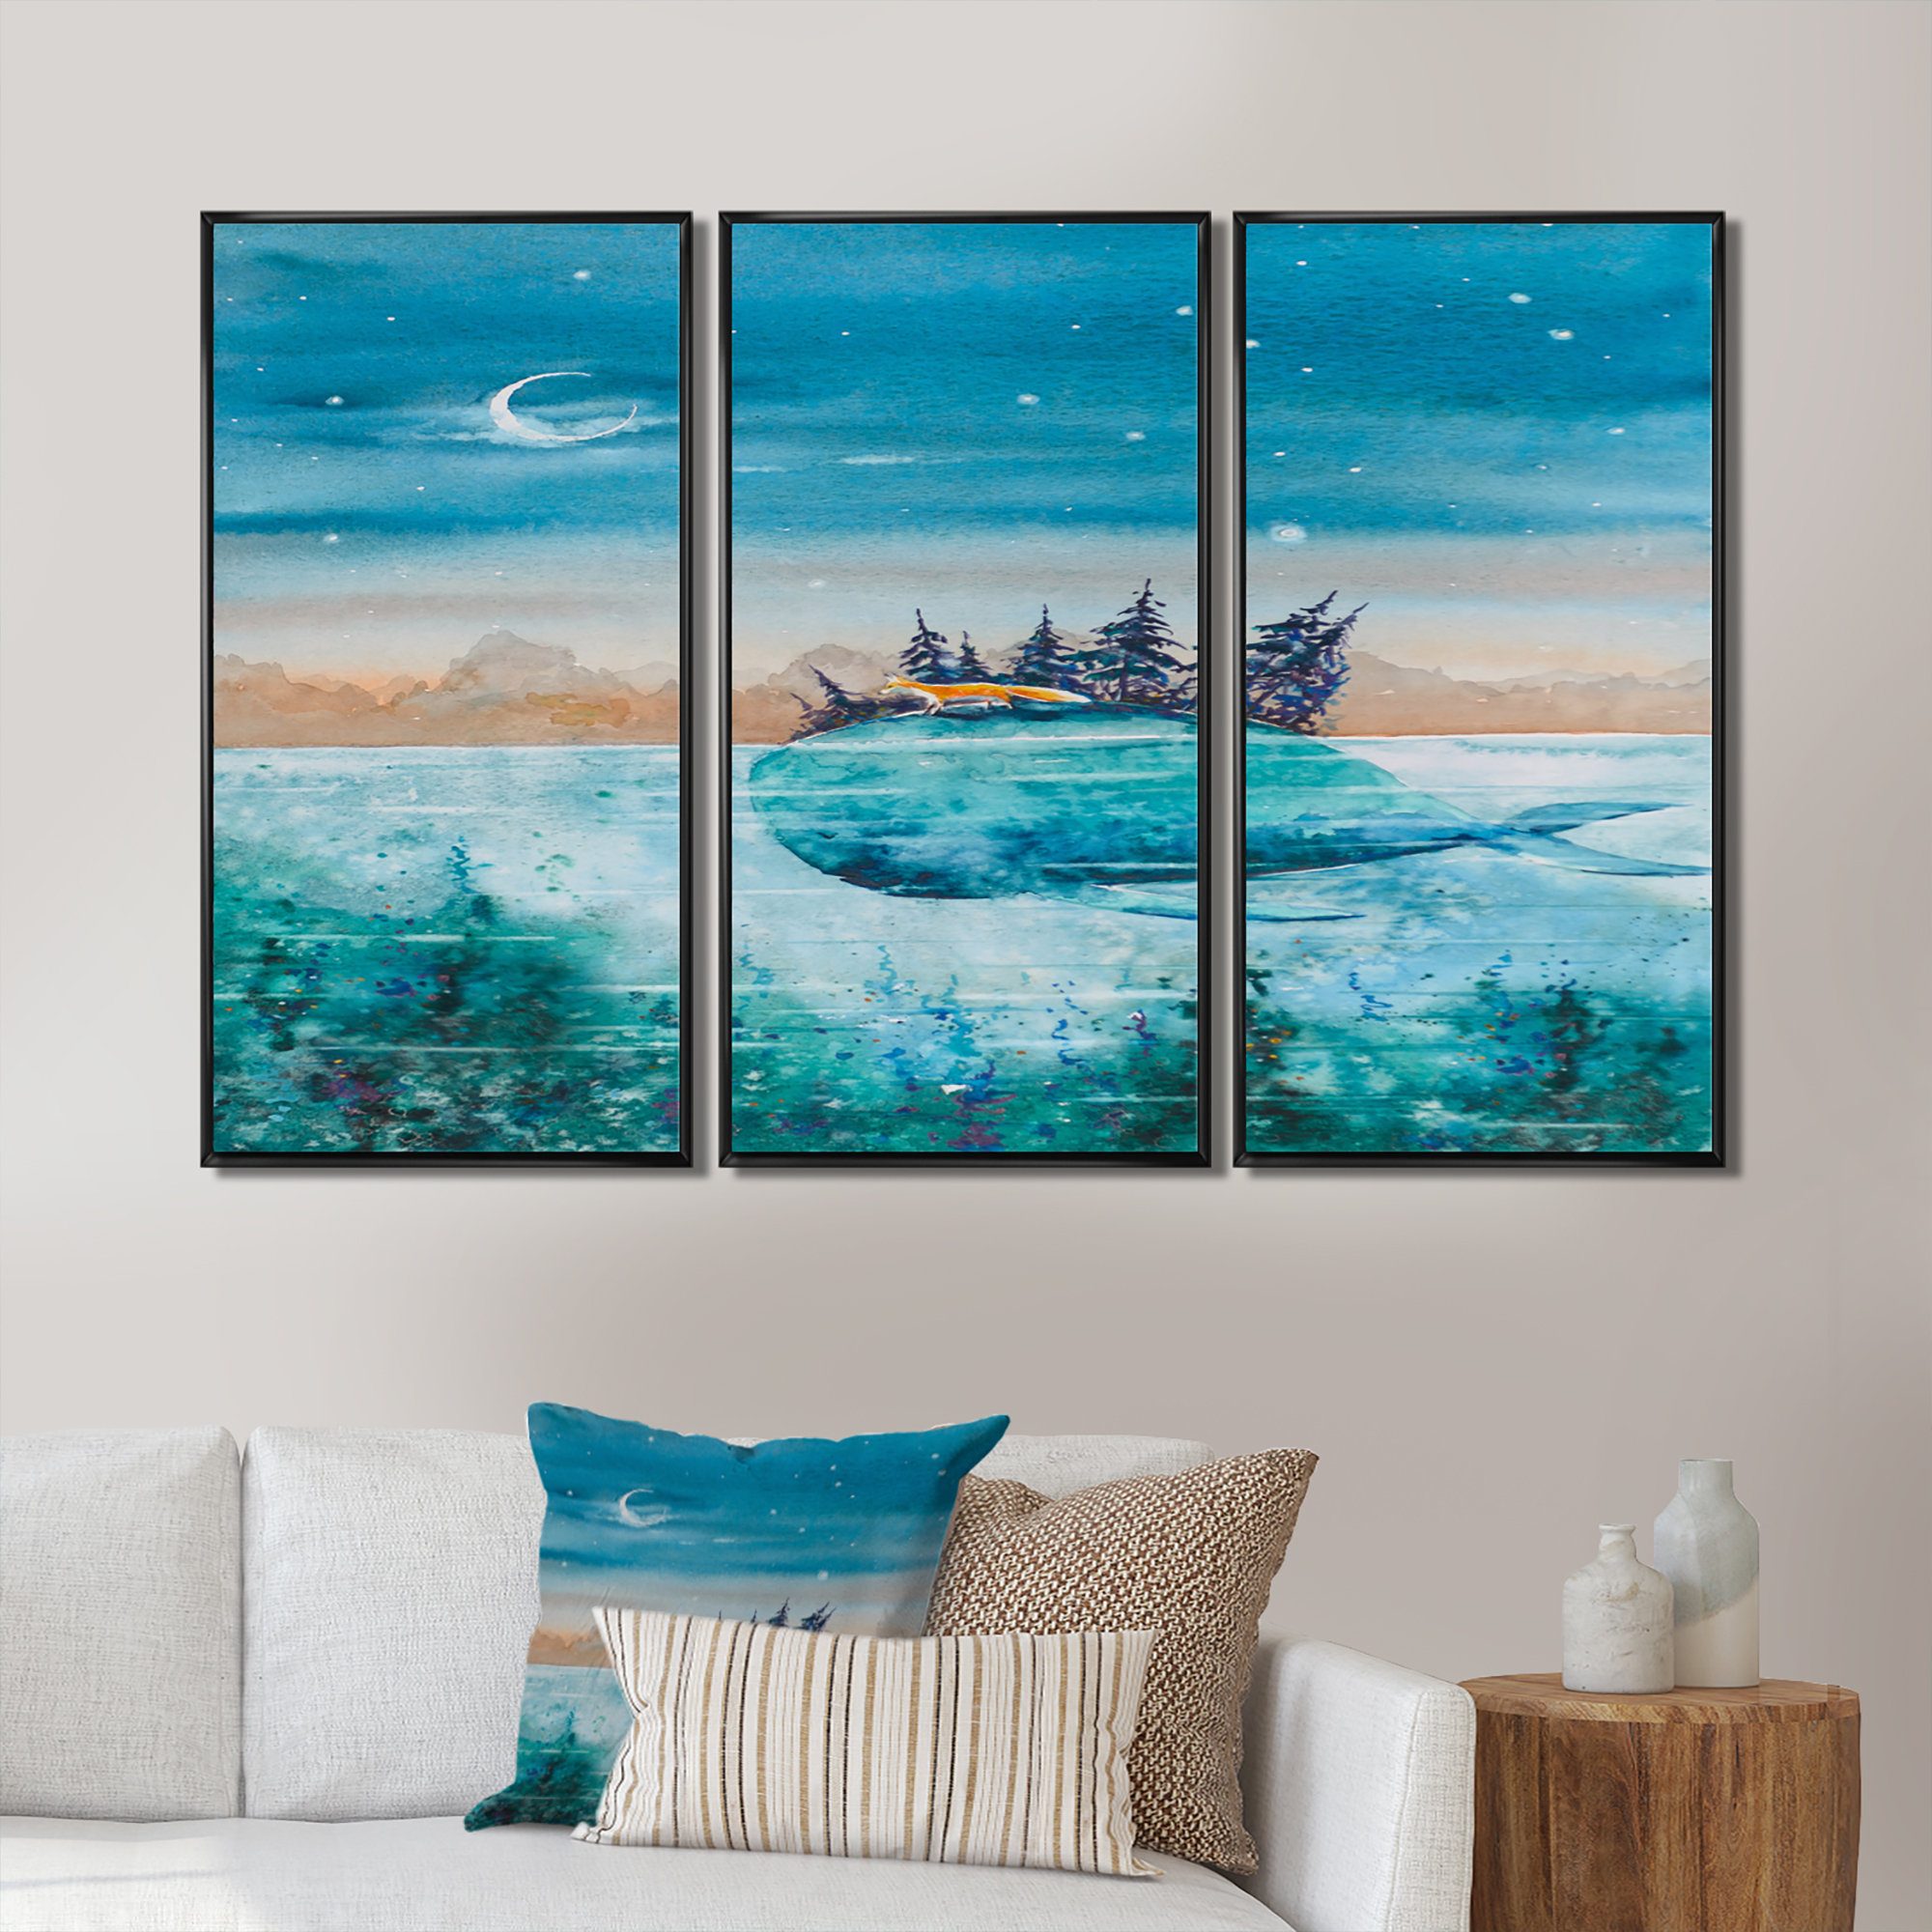 Winston Porter Whale And Fox In Fairy Tale Landscape Framed On